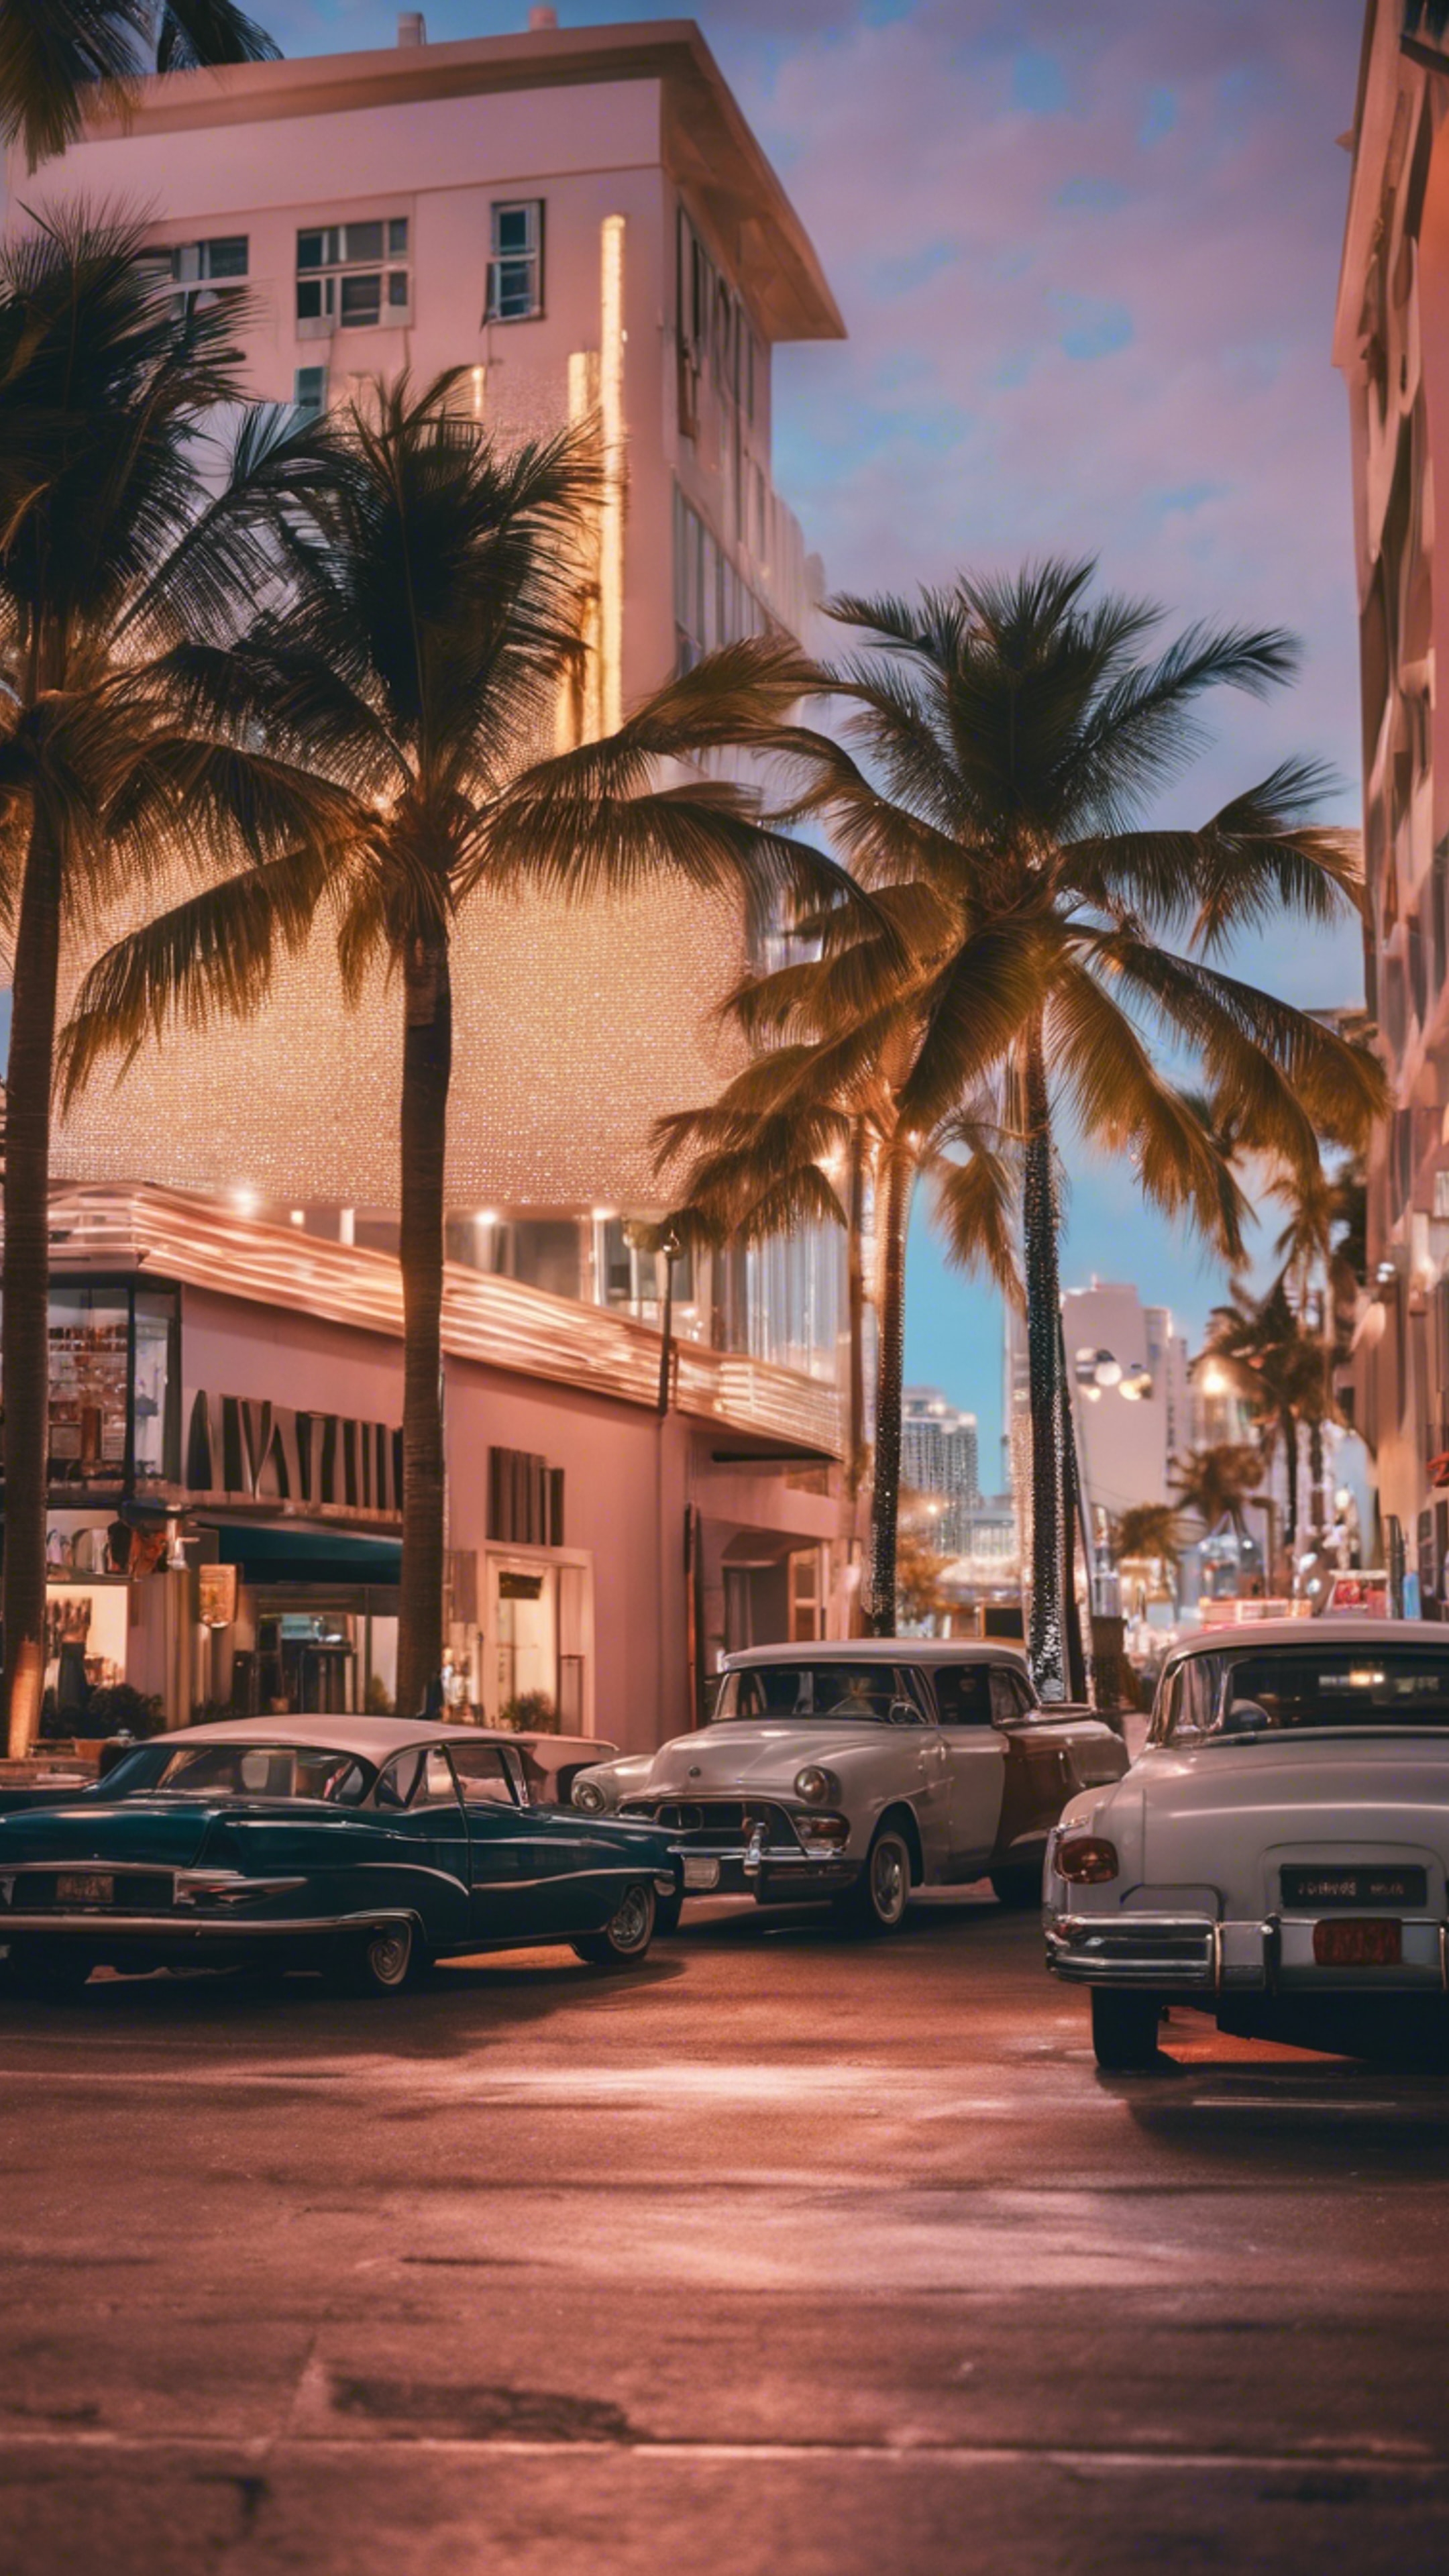 A bustling Miami Beach street scene, with art deco buildings and palm trees, vibrant nightlife atmosphere.壁紙[c899e7f744884bb387cd]